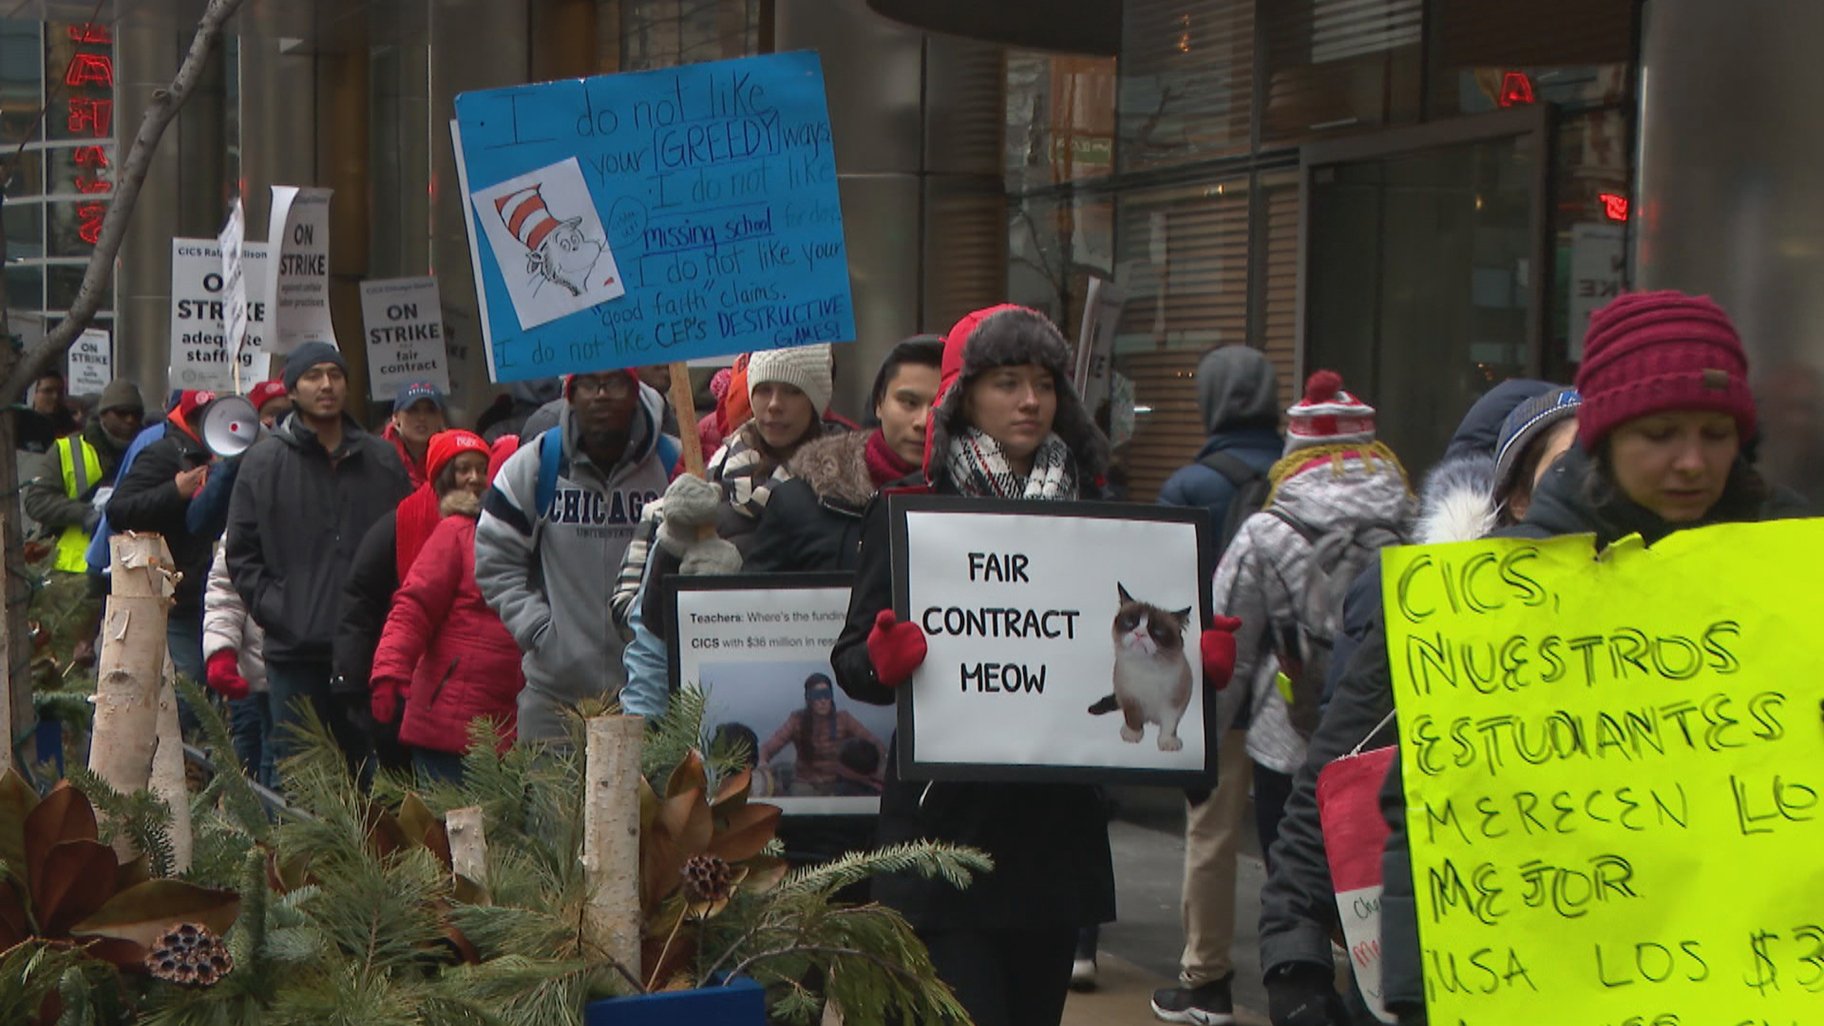 Chicago International Charter School educators picketed outside CW Henderson on Feb. 6, 2019. (Chicago Tonight)